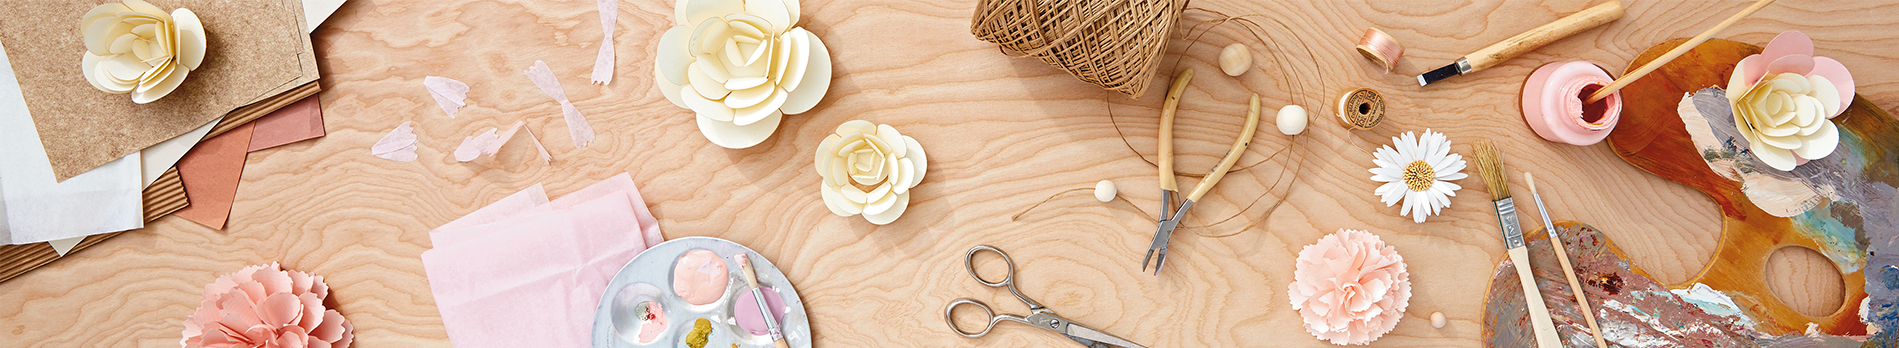 Arts and crafts supplies like paper flowers, twine, paint and scissors scattered on a wood grain tabletop.